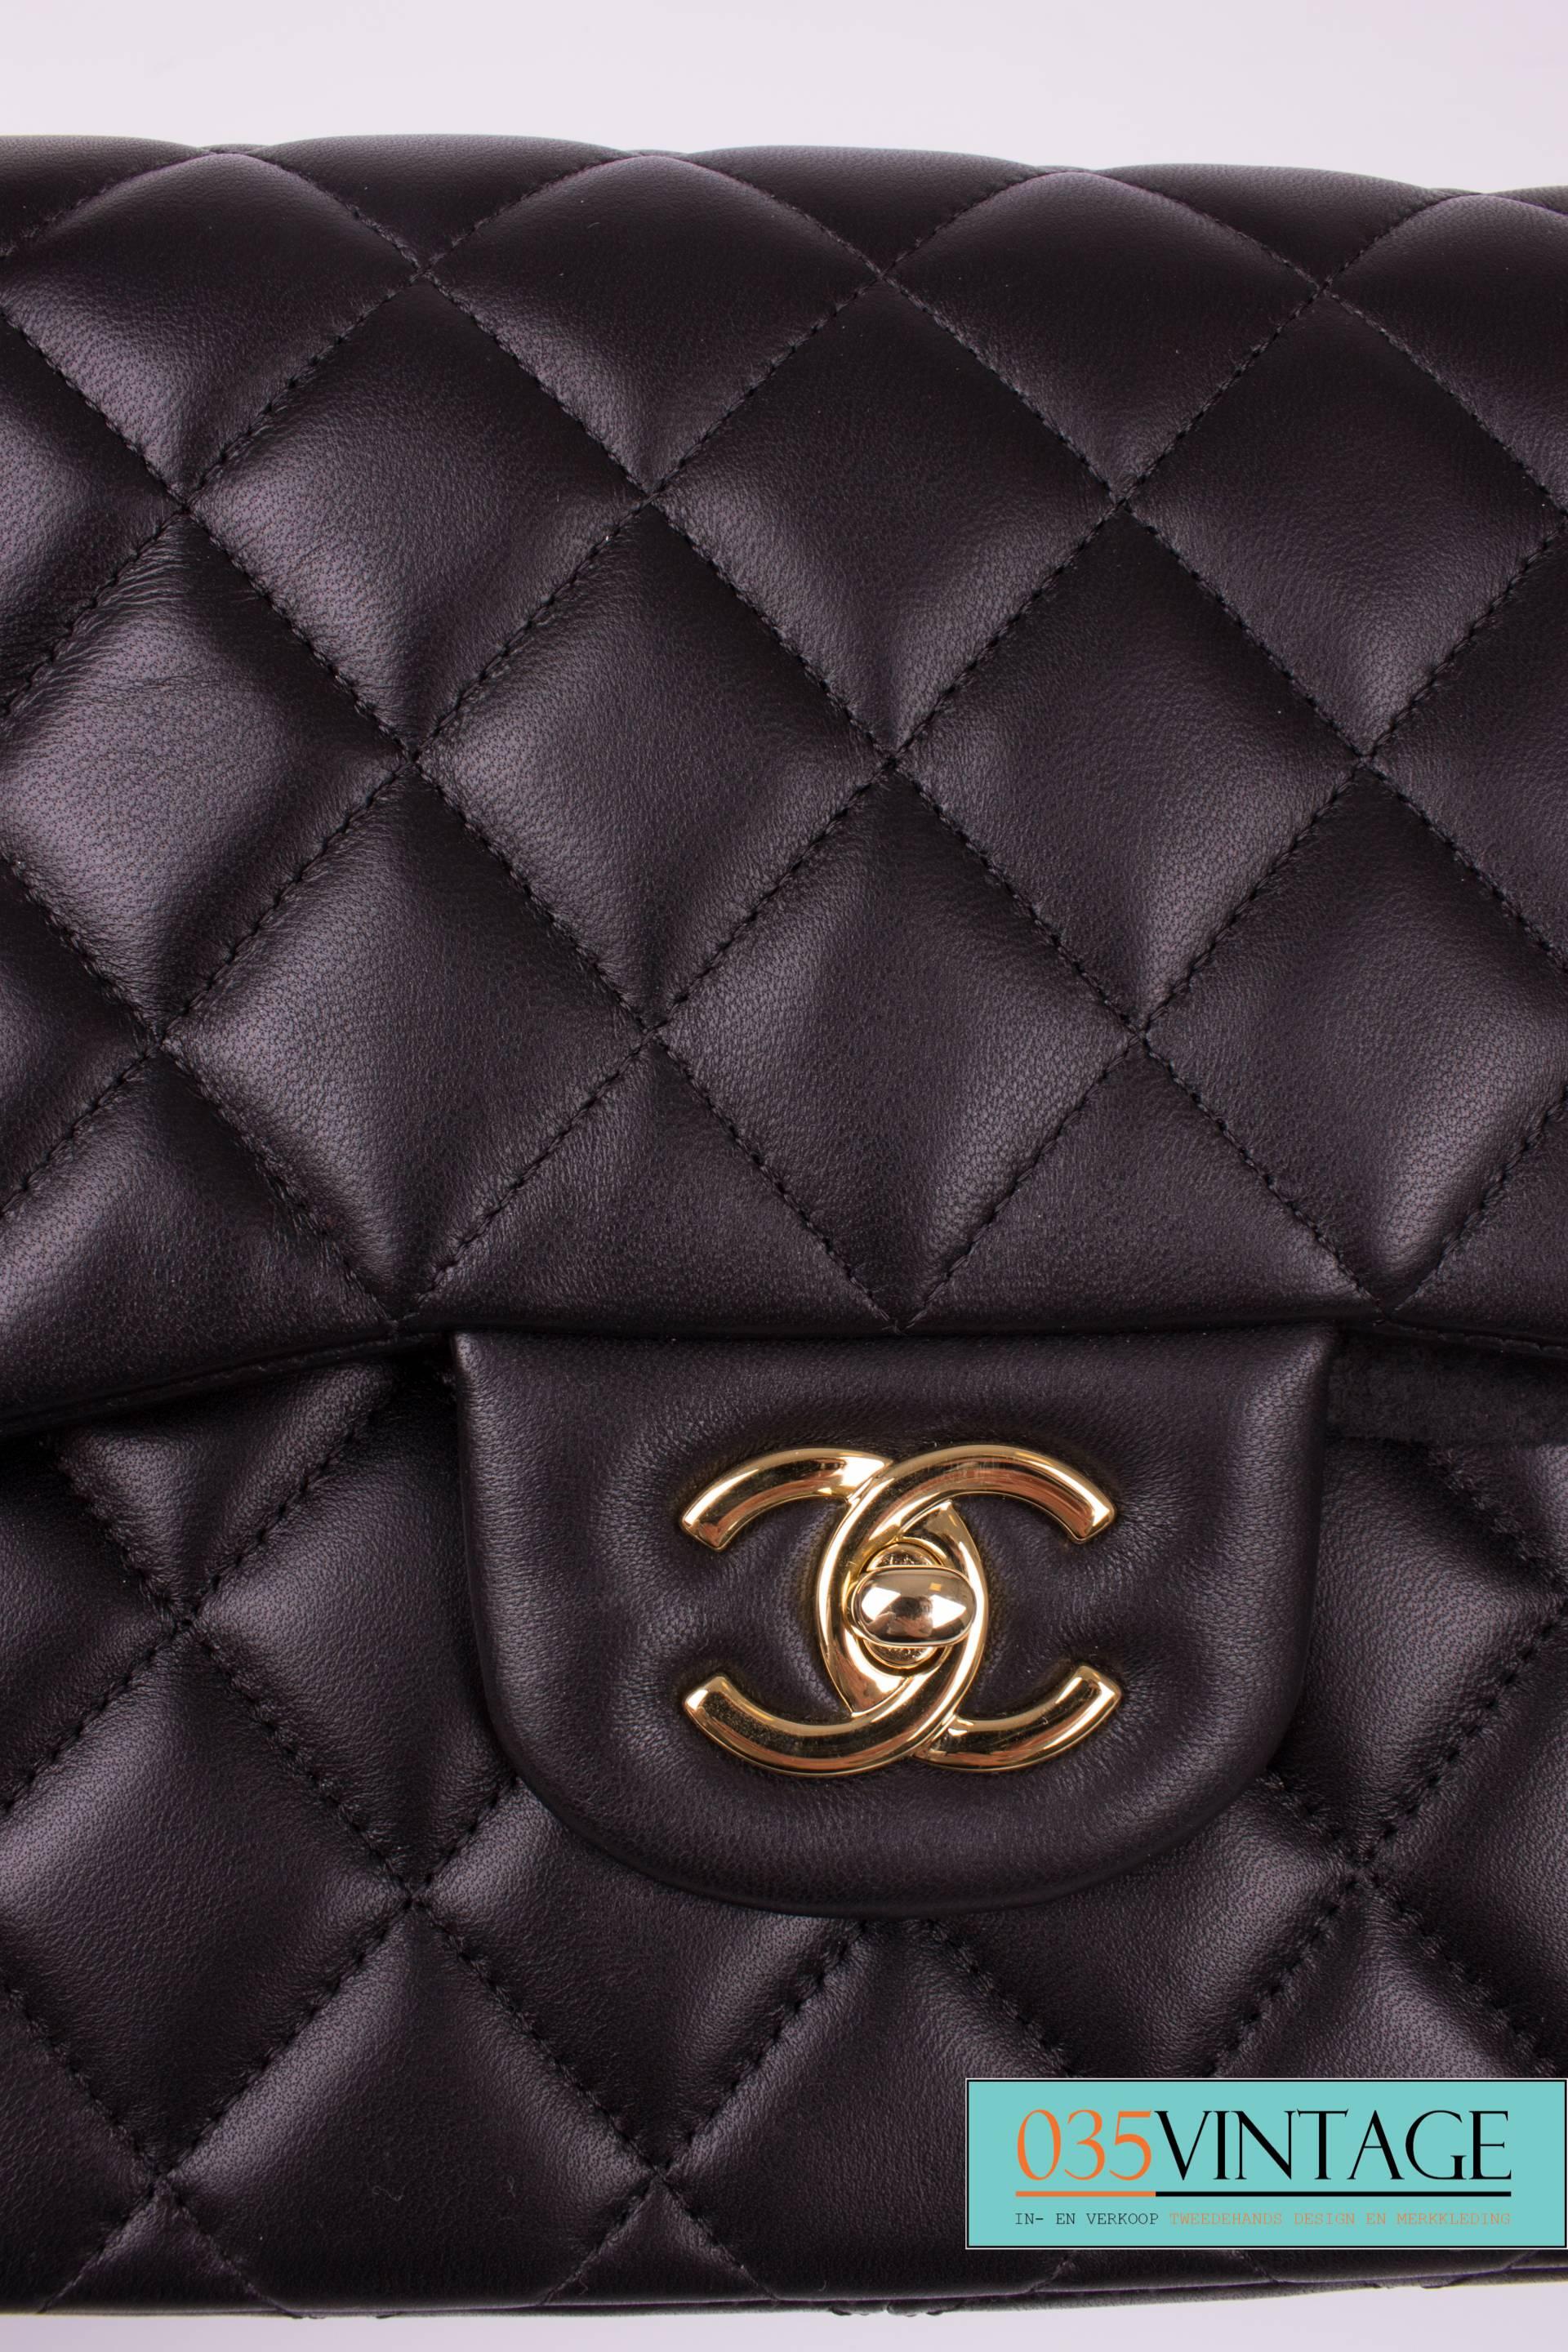 Chanel Timeless Classic Double Flap Bag Jumbo - black leather - new!  3